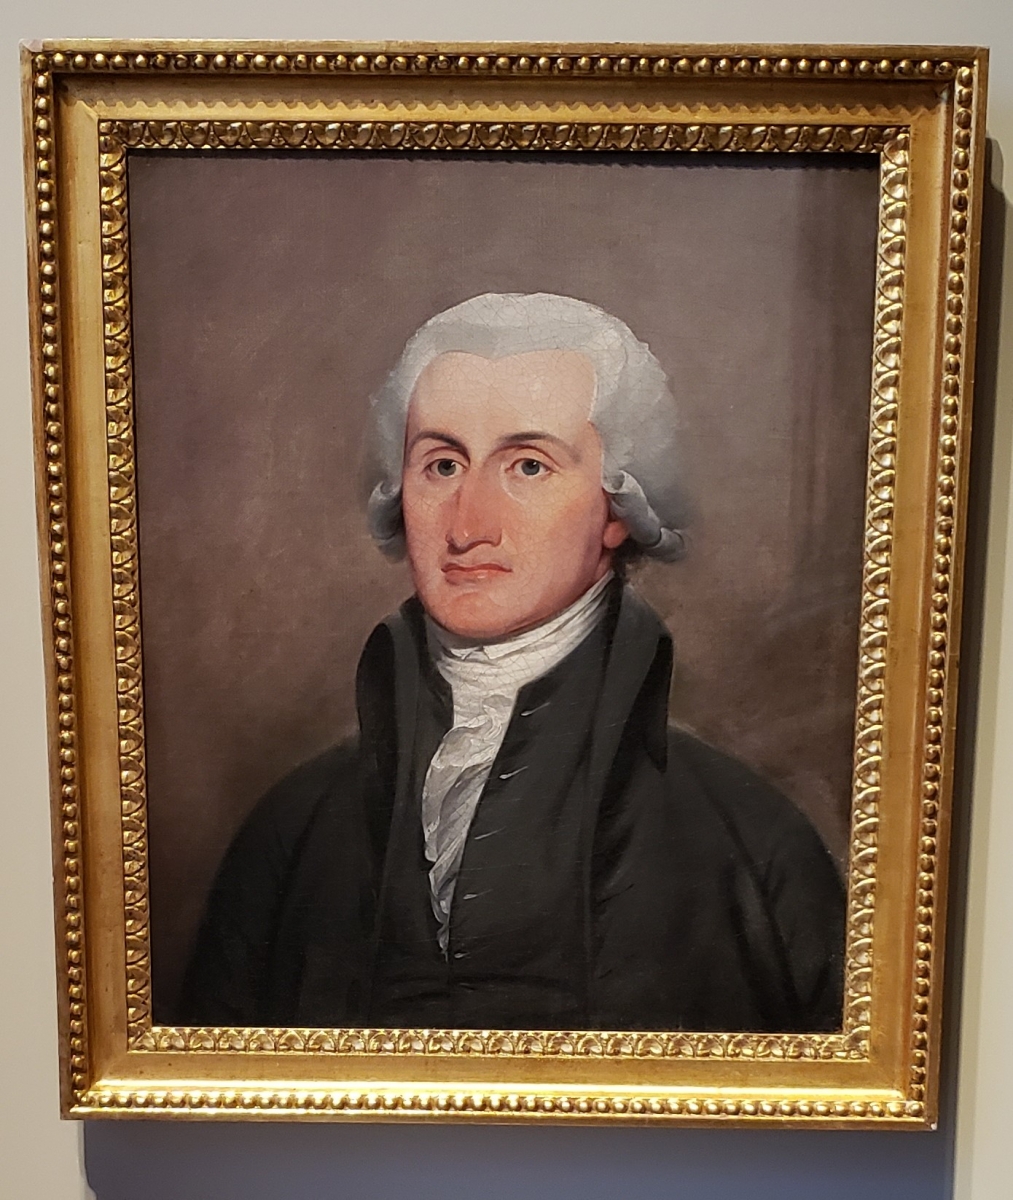 John Jay Portrait located in the Second Bank of the United States Portrait Gallery